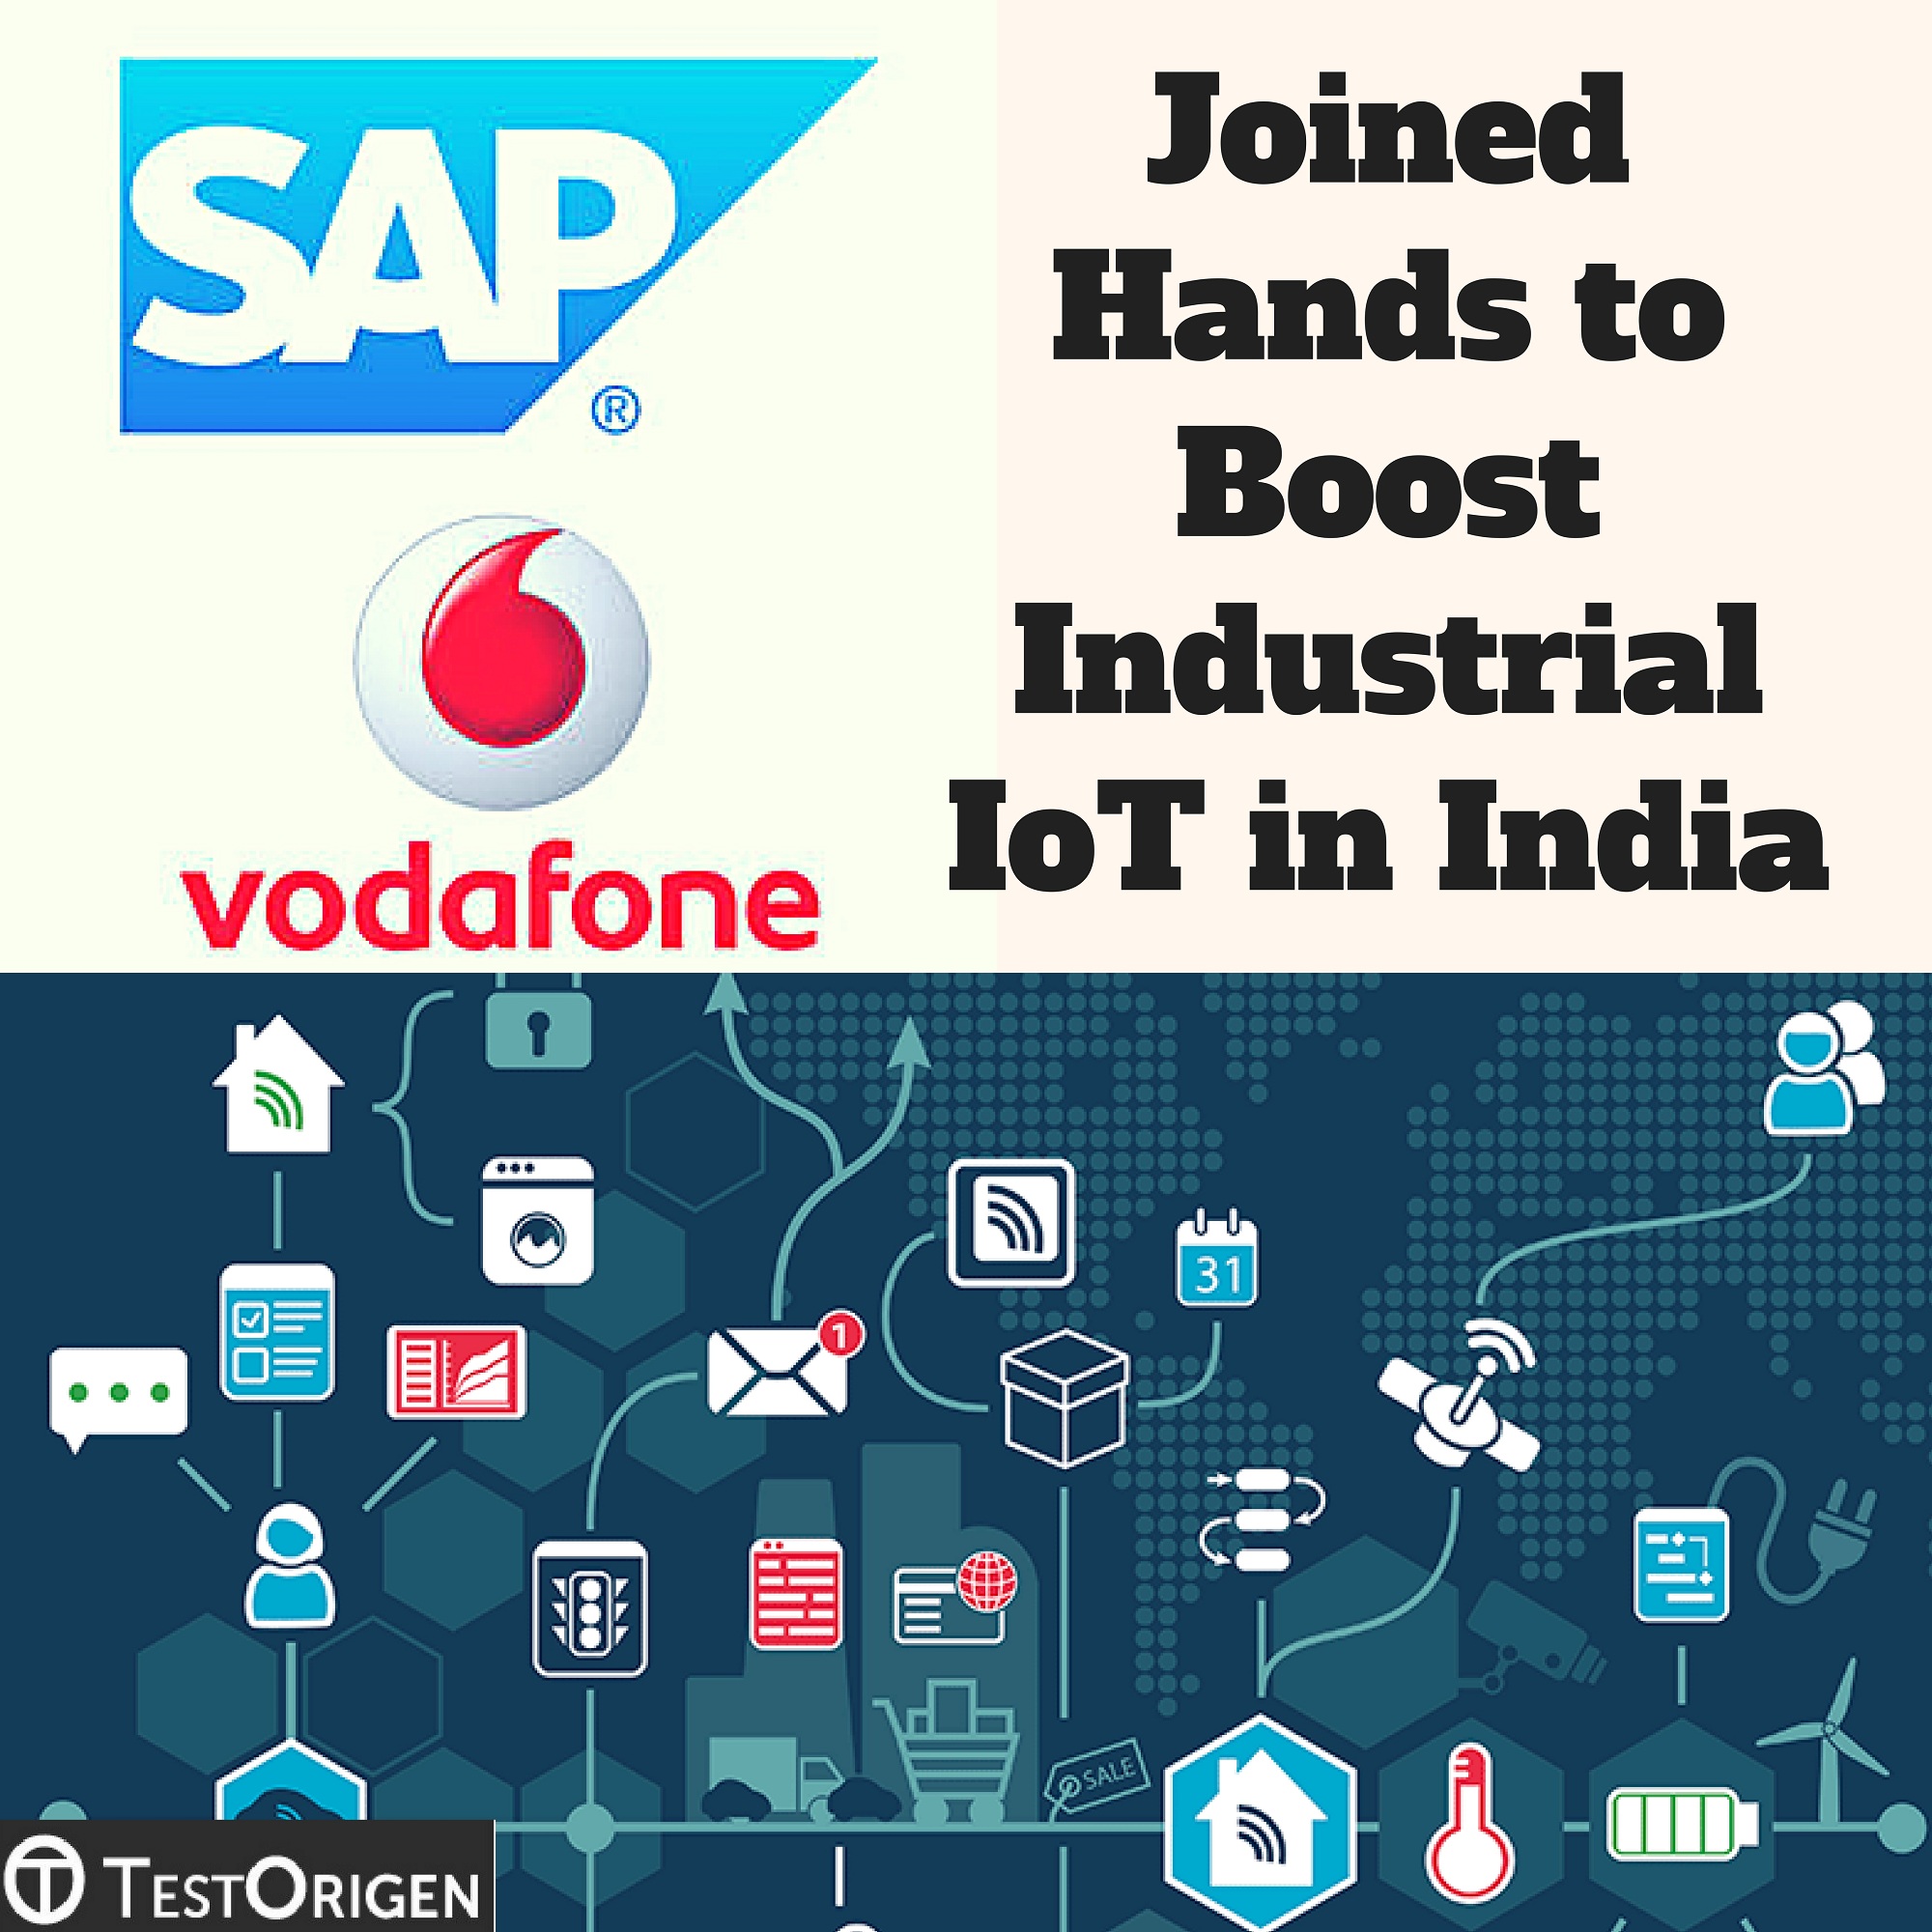 Vodafone & SAP Joined Hands to Boost Industrial IoT in India